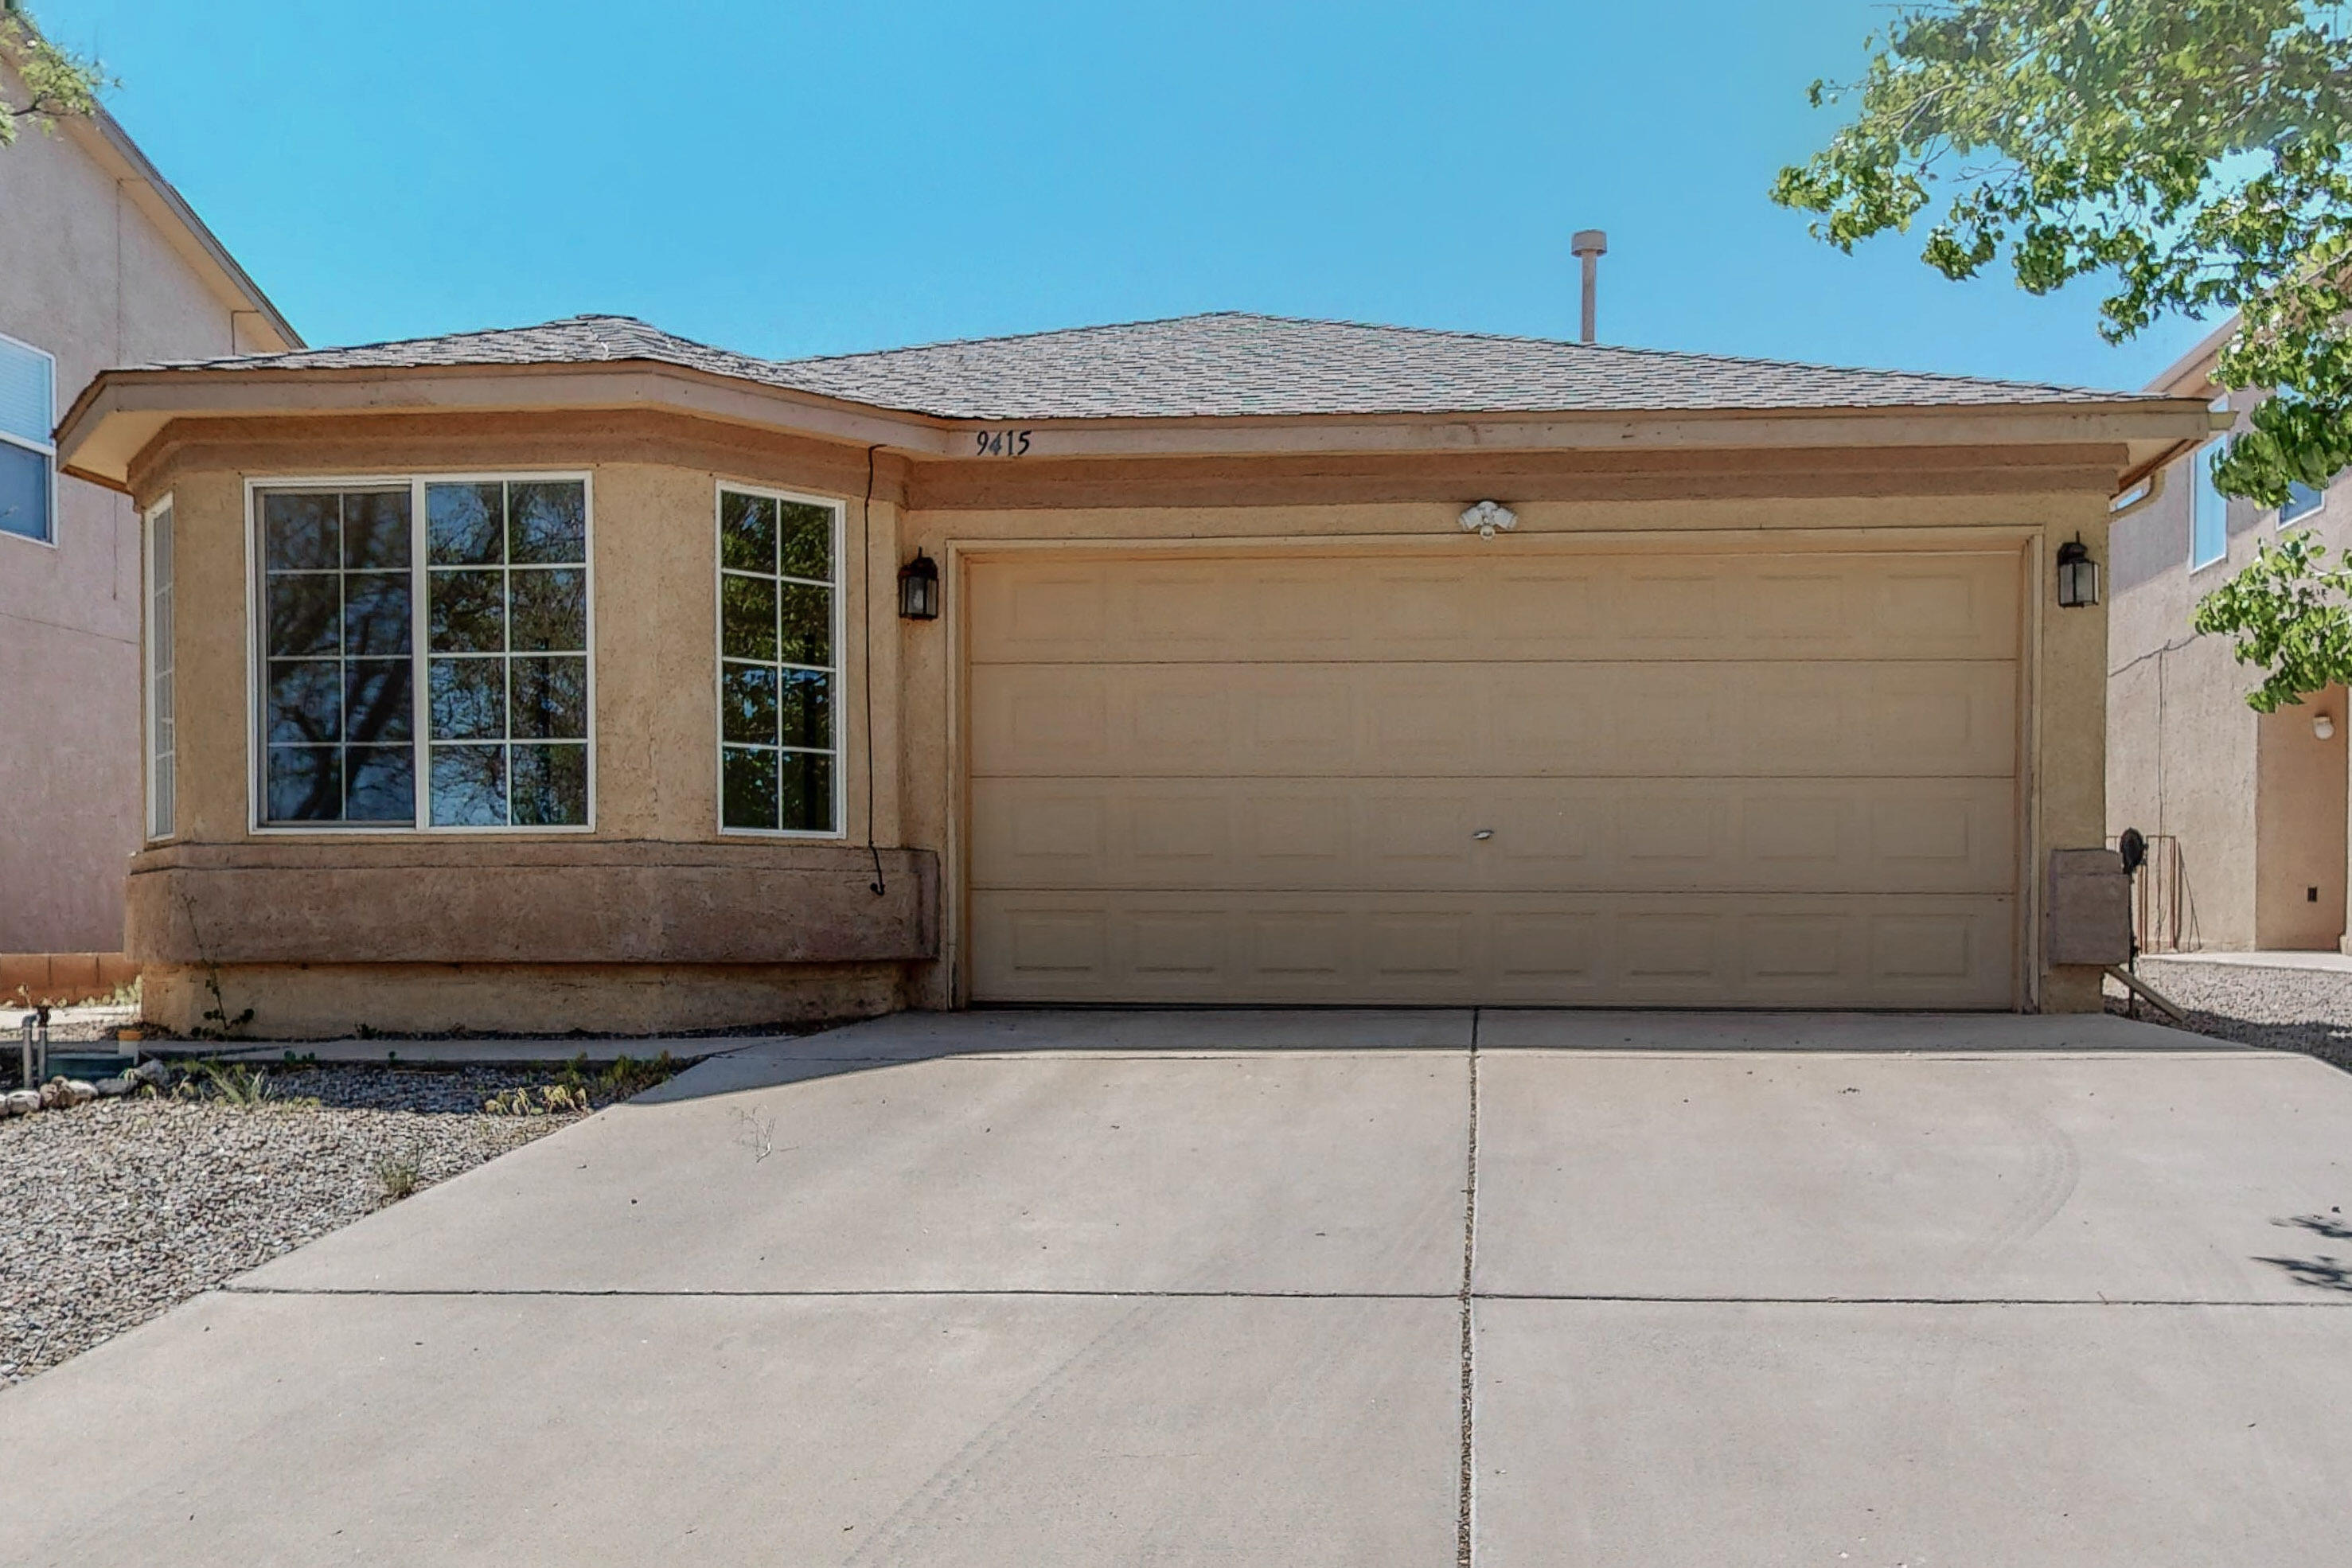 Welcome to Ventana Ranch West. This home features 3 bedrooms 2 full baths, split floor plan, formal dining area, kitchen w/breakfast nook, 2 car attached garage, Private backyard.